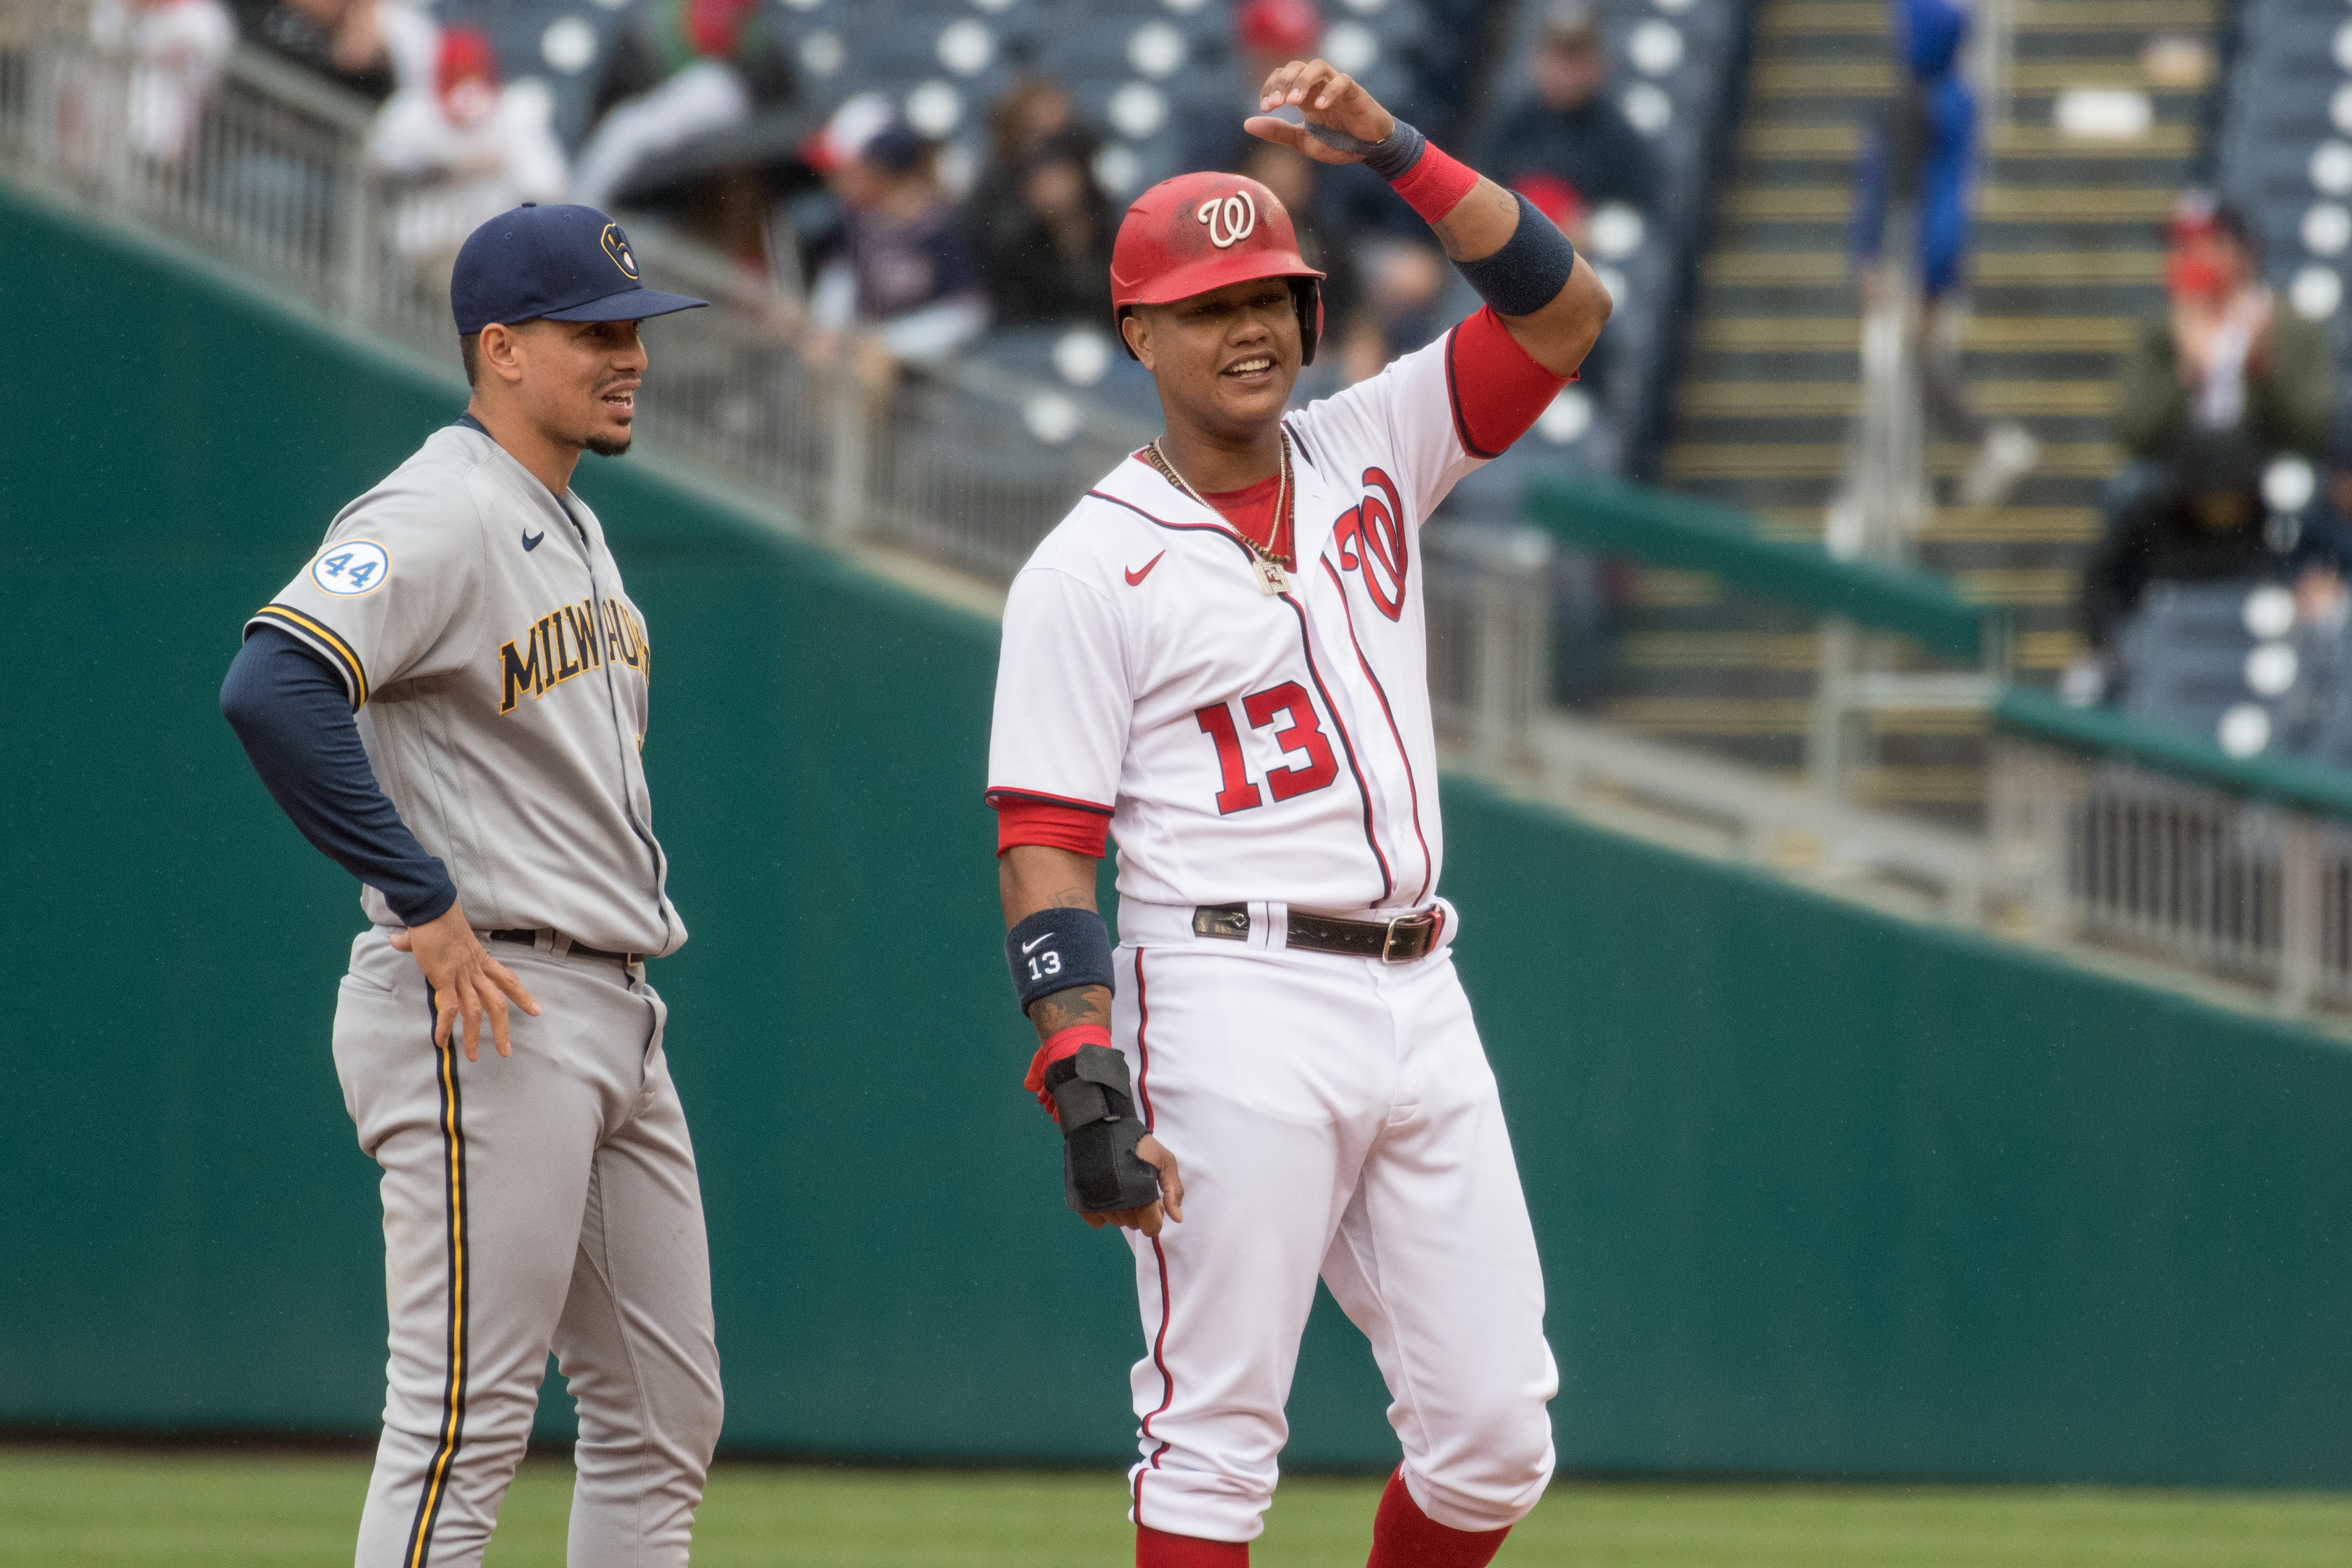 File:Starlin Castro and Willy Adames Smiling Together at Second Base from  Nationals vs. Brewers at Nationals Park, May 30th, 2021 (All-Pro Reels  Photography) (51221936038).jpg - Wikimedia Commons